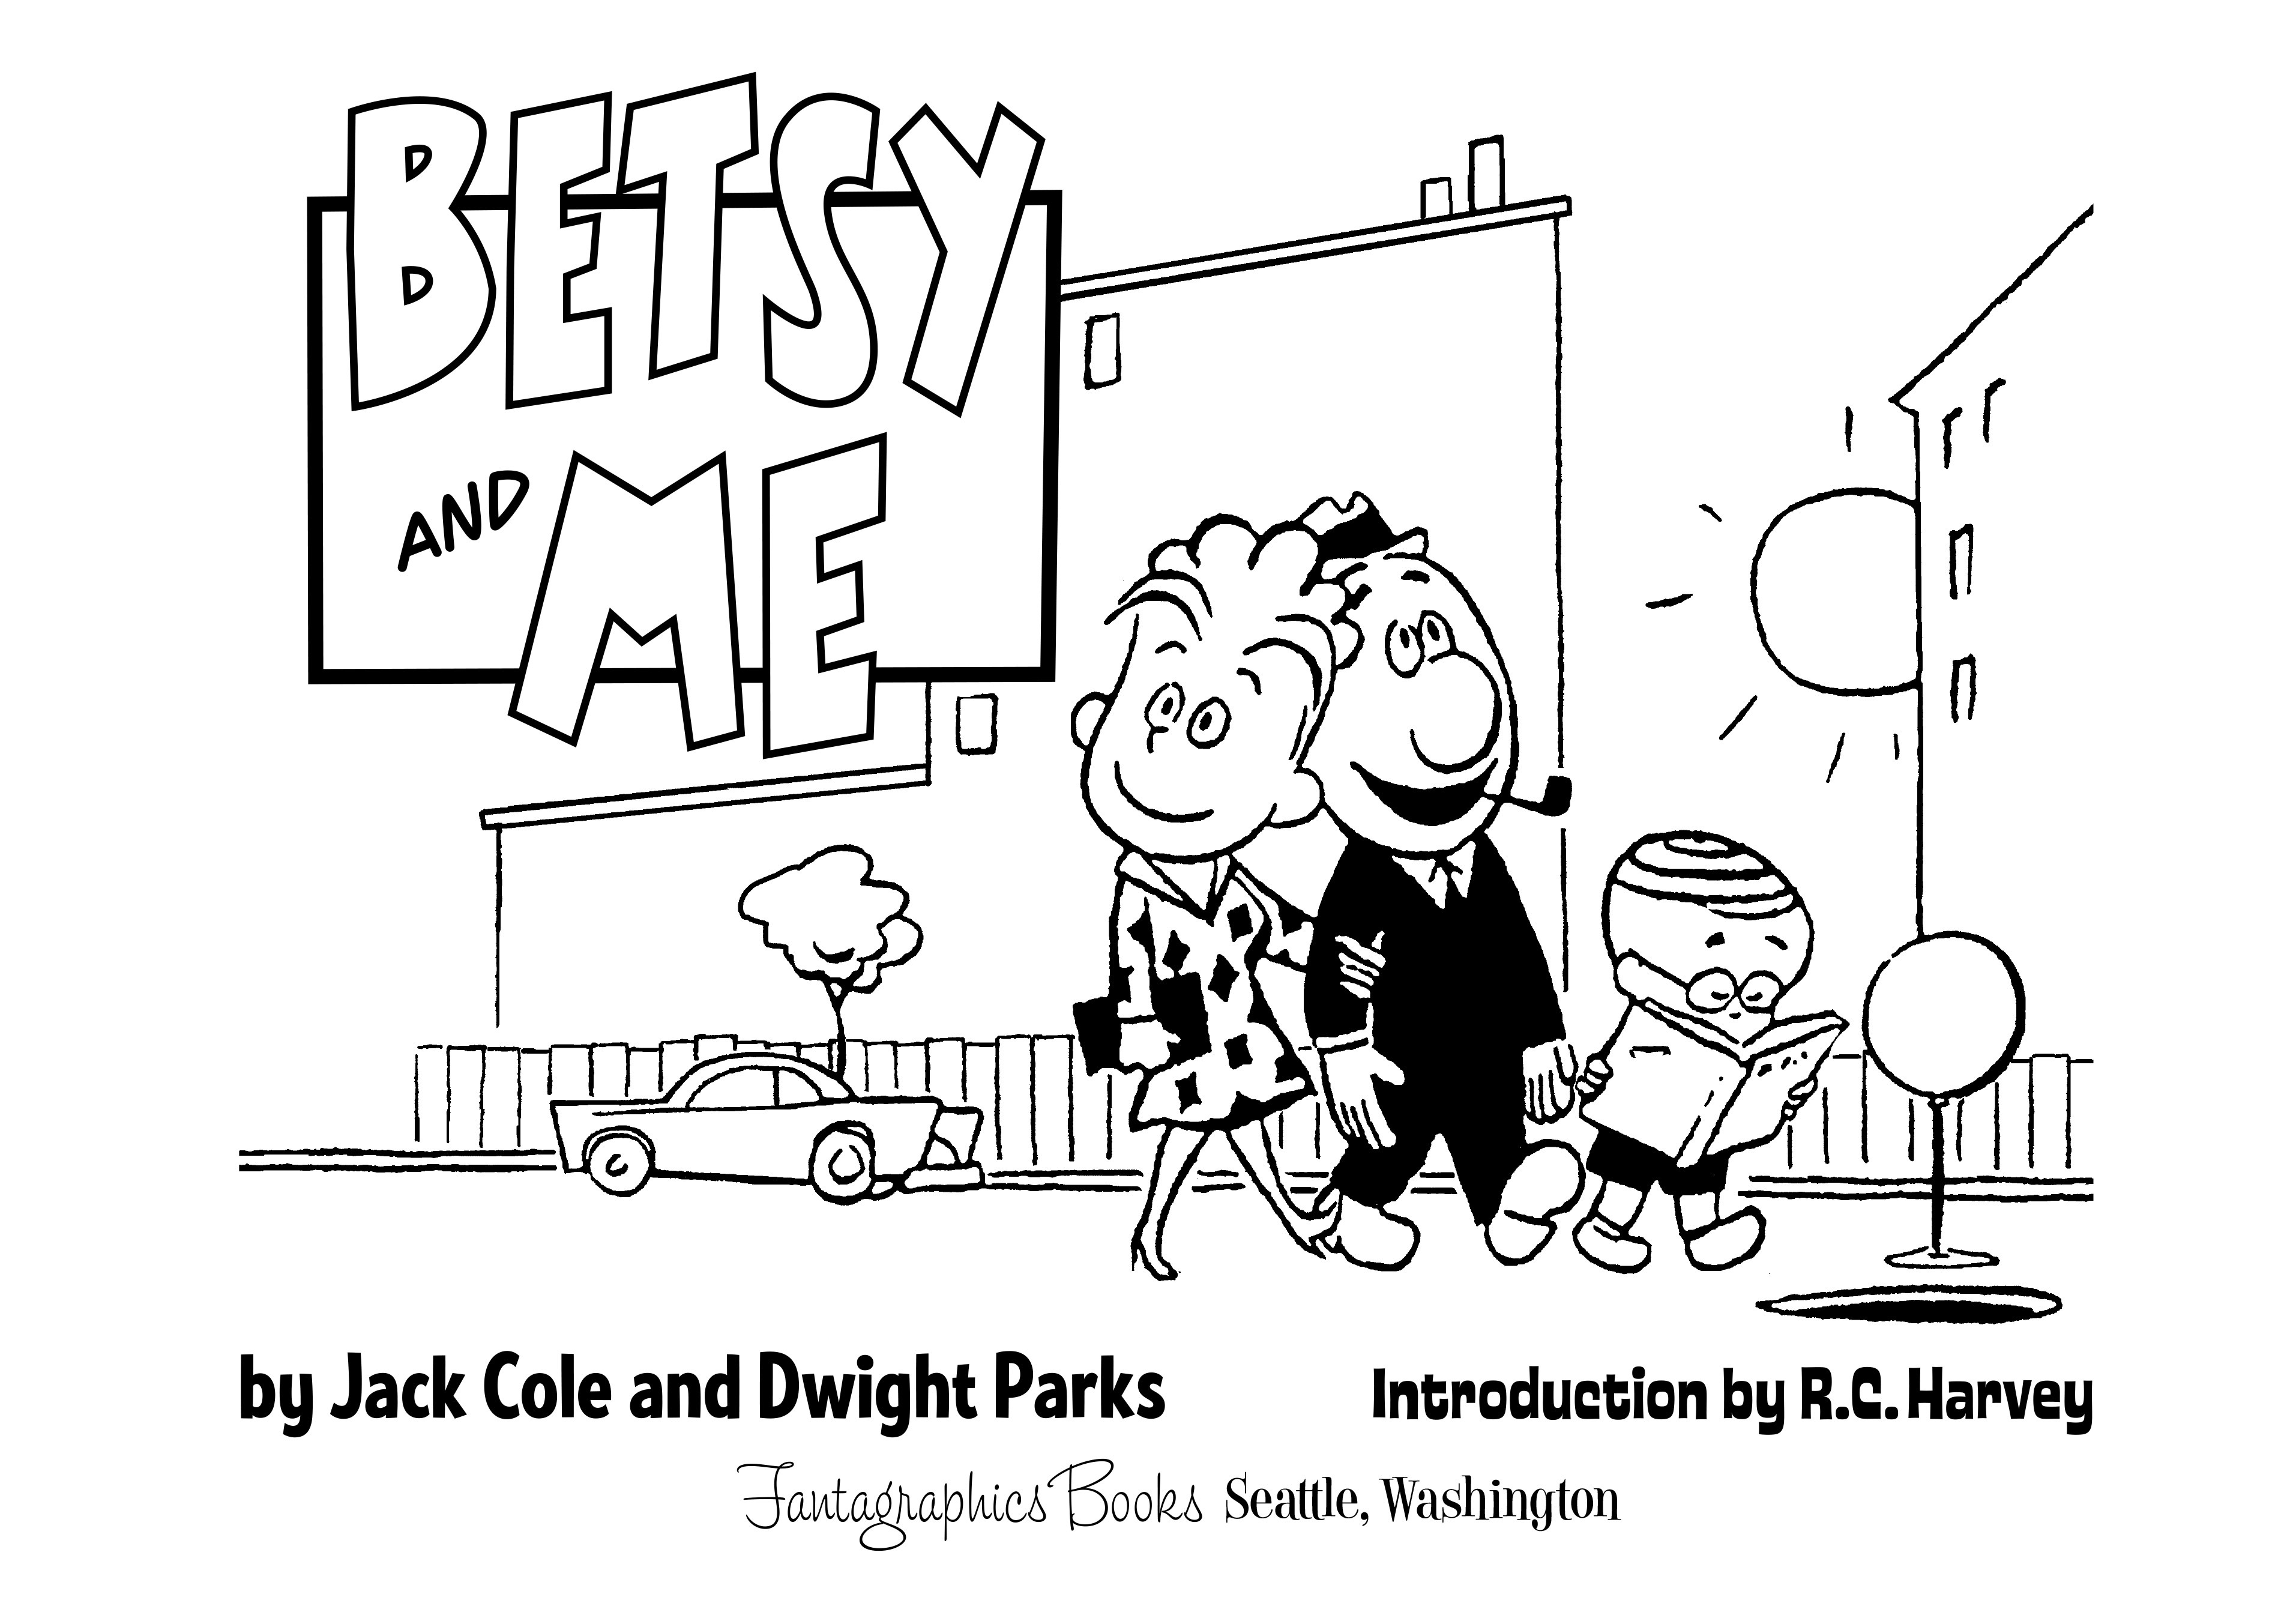 Read online Betsy and Me comic -  Issue # TPB - 4